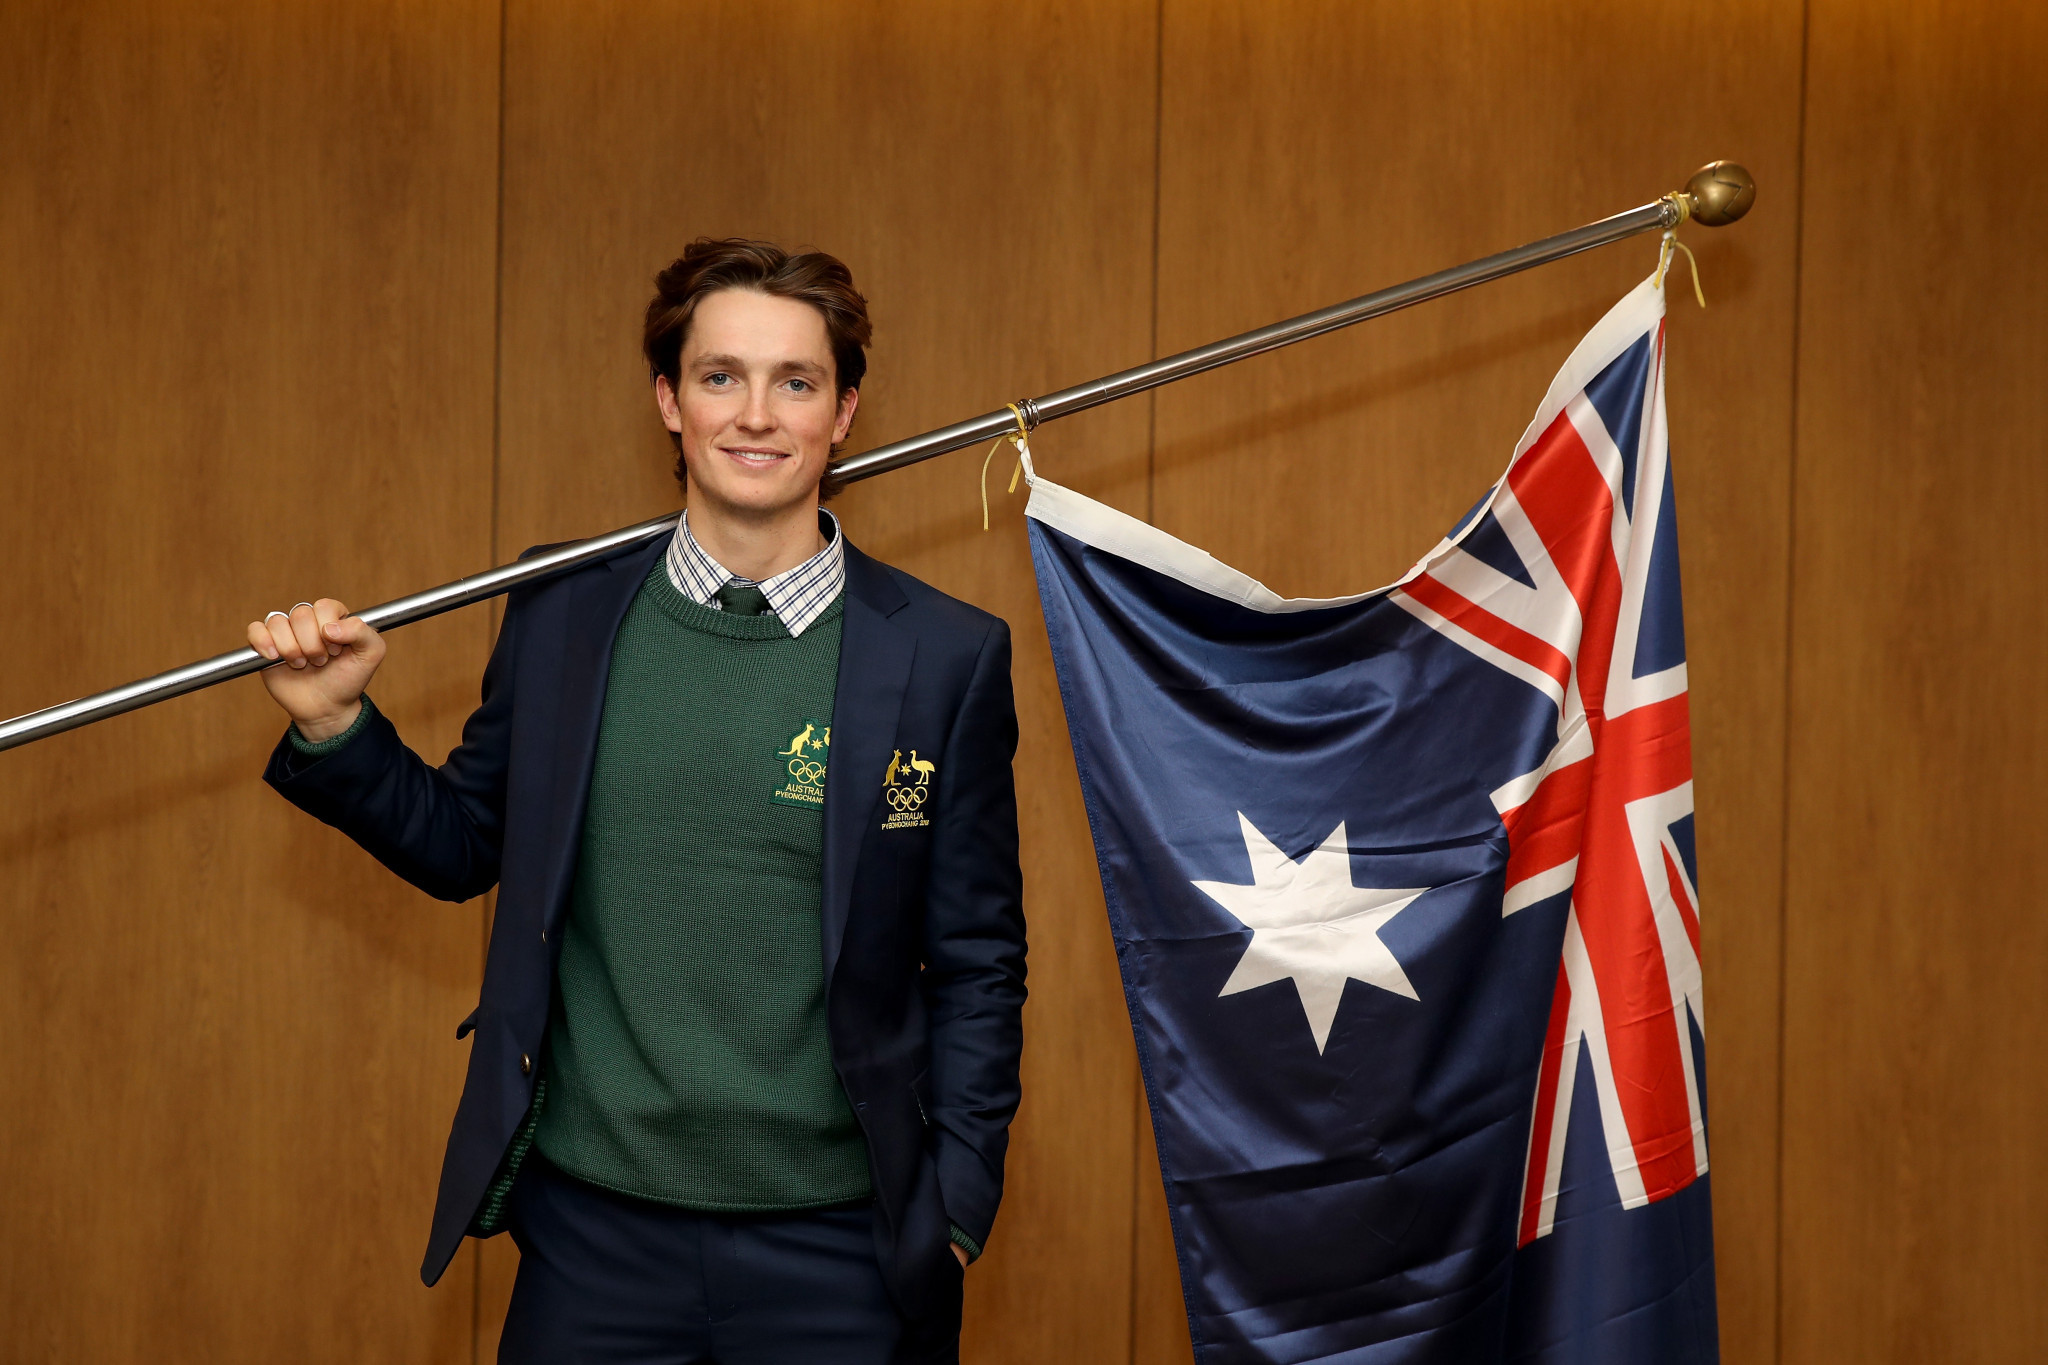 Australian snowboarder Scotty James has criticised judging in the sport as he was confirmed as his country’s flagbearer ©Getty Images